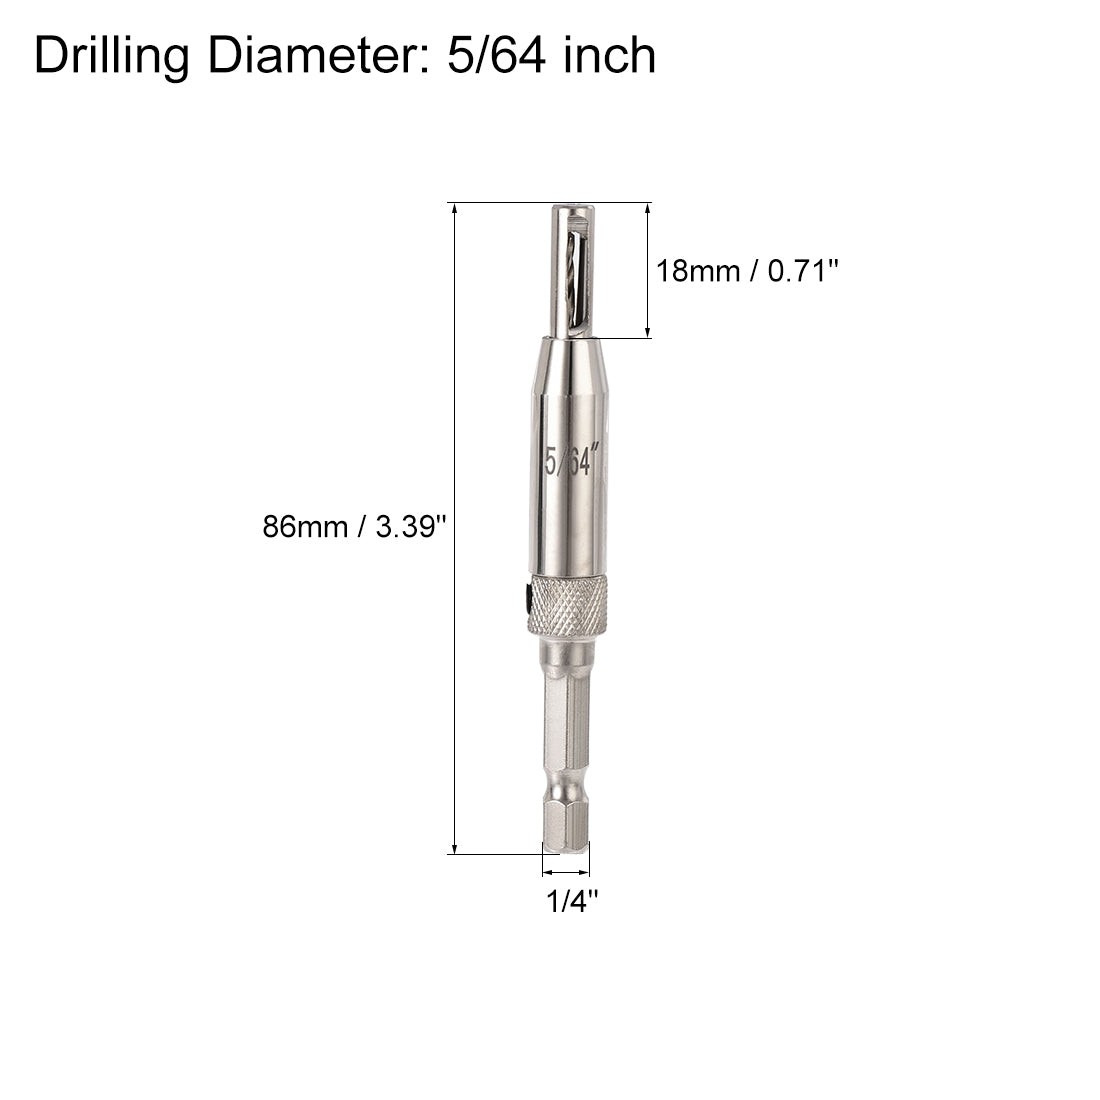 uxcell Uxcell Self Centering Hinge Tapper Core Drill Bit, Hole Puncher, 5/64 Diameter, for Woodworking, Silver